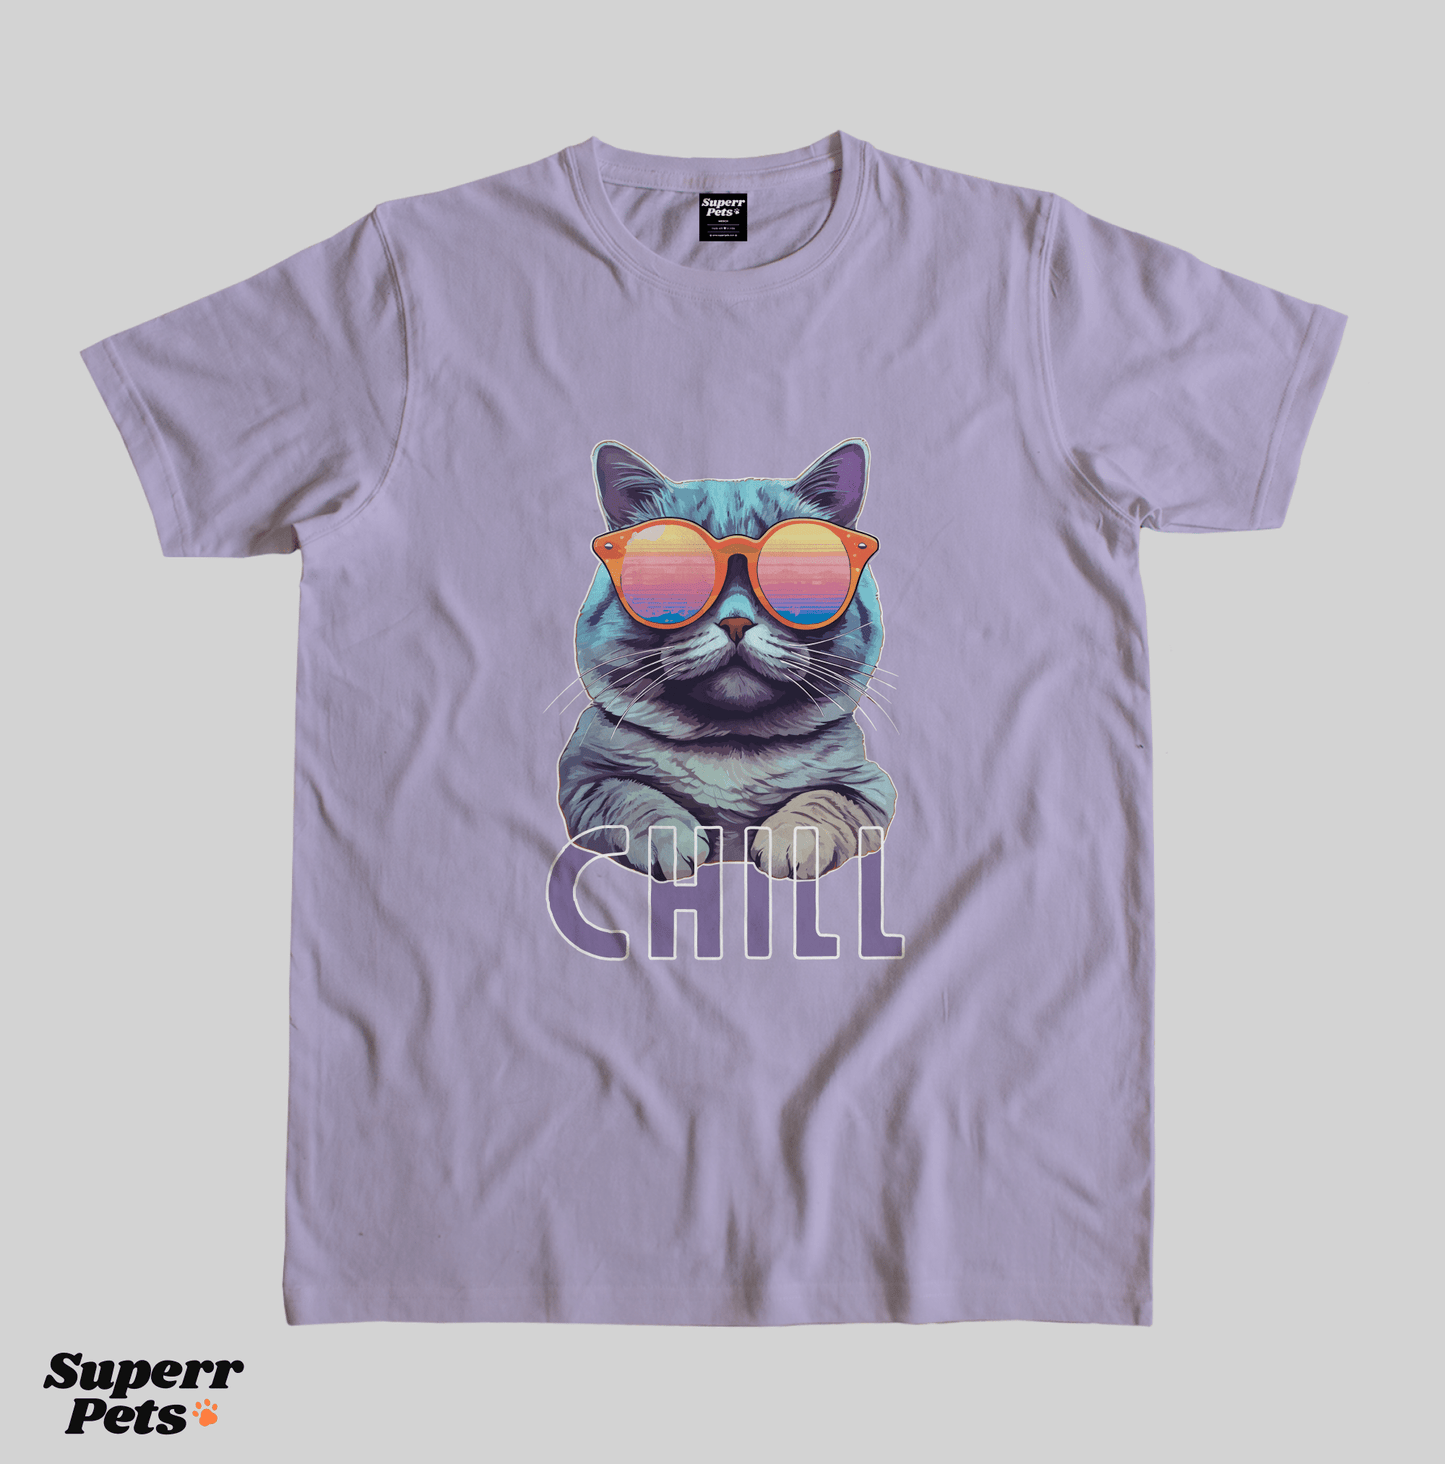 Superr Pets Casual T-Shirt Casual T-Shirt / Lavender / S Chill | Casual T-Shirt